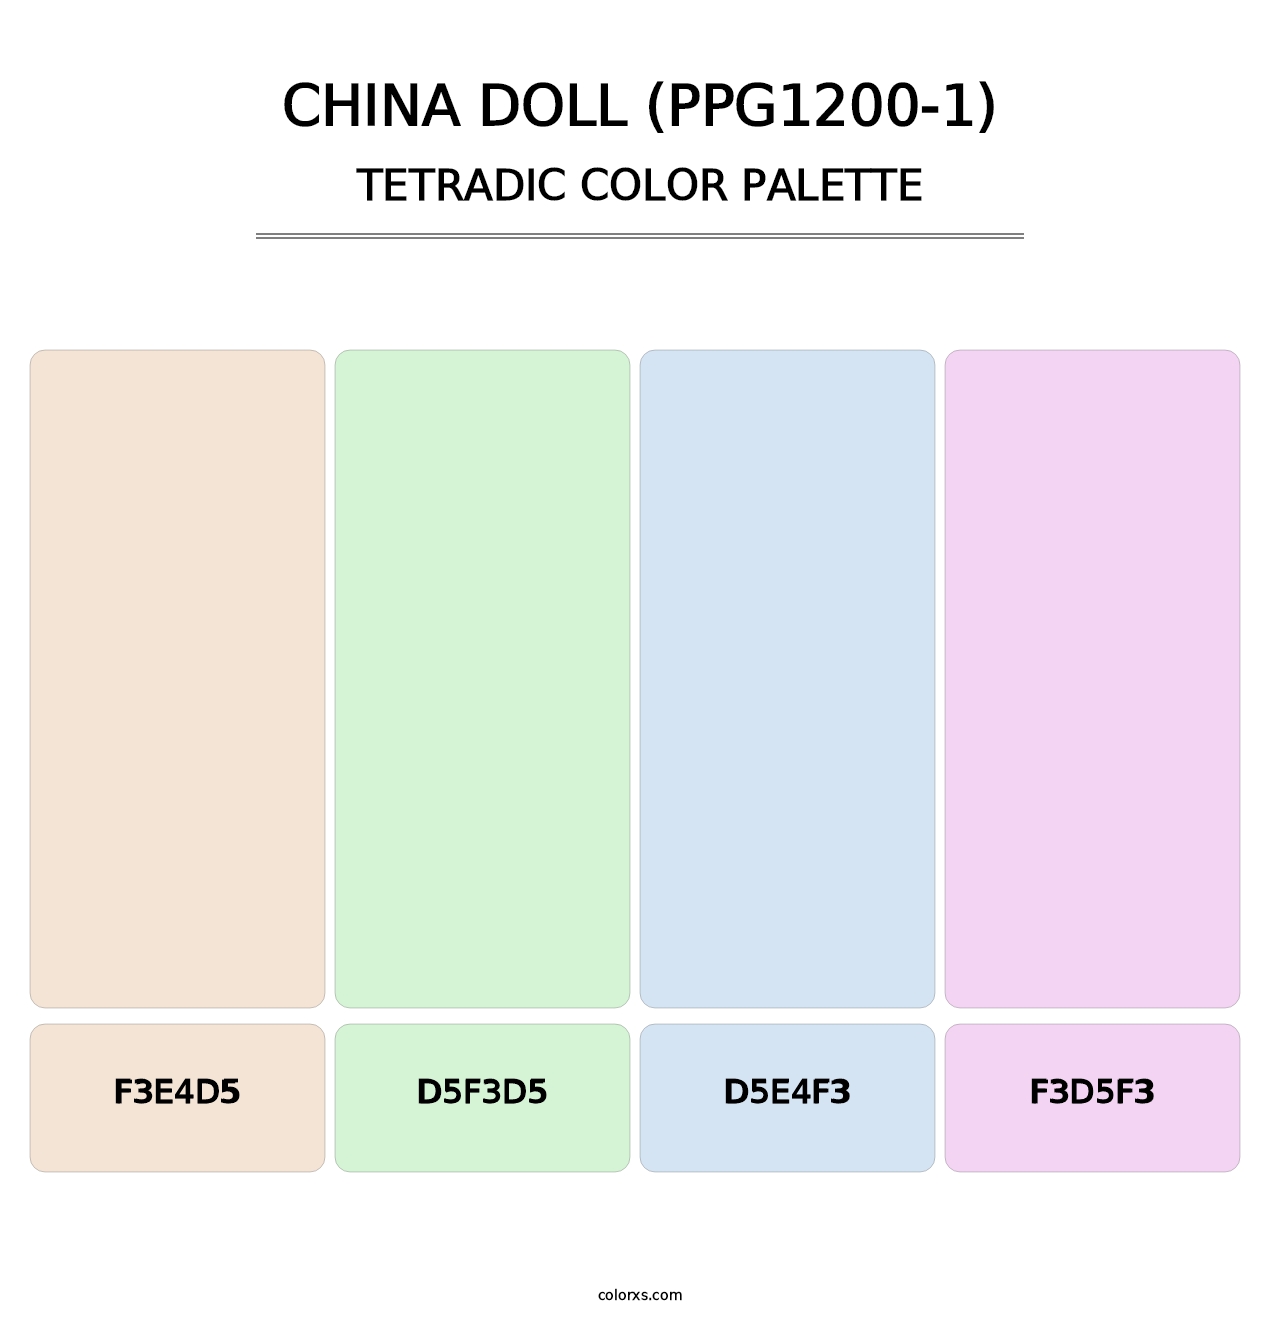 China Doll (PPG1200-1) - Tetradic Color Palette